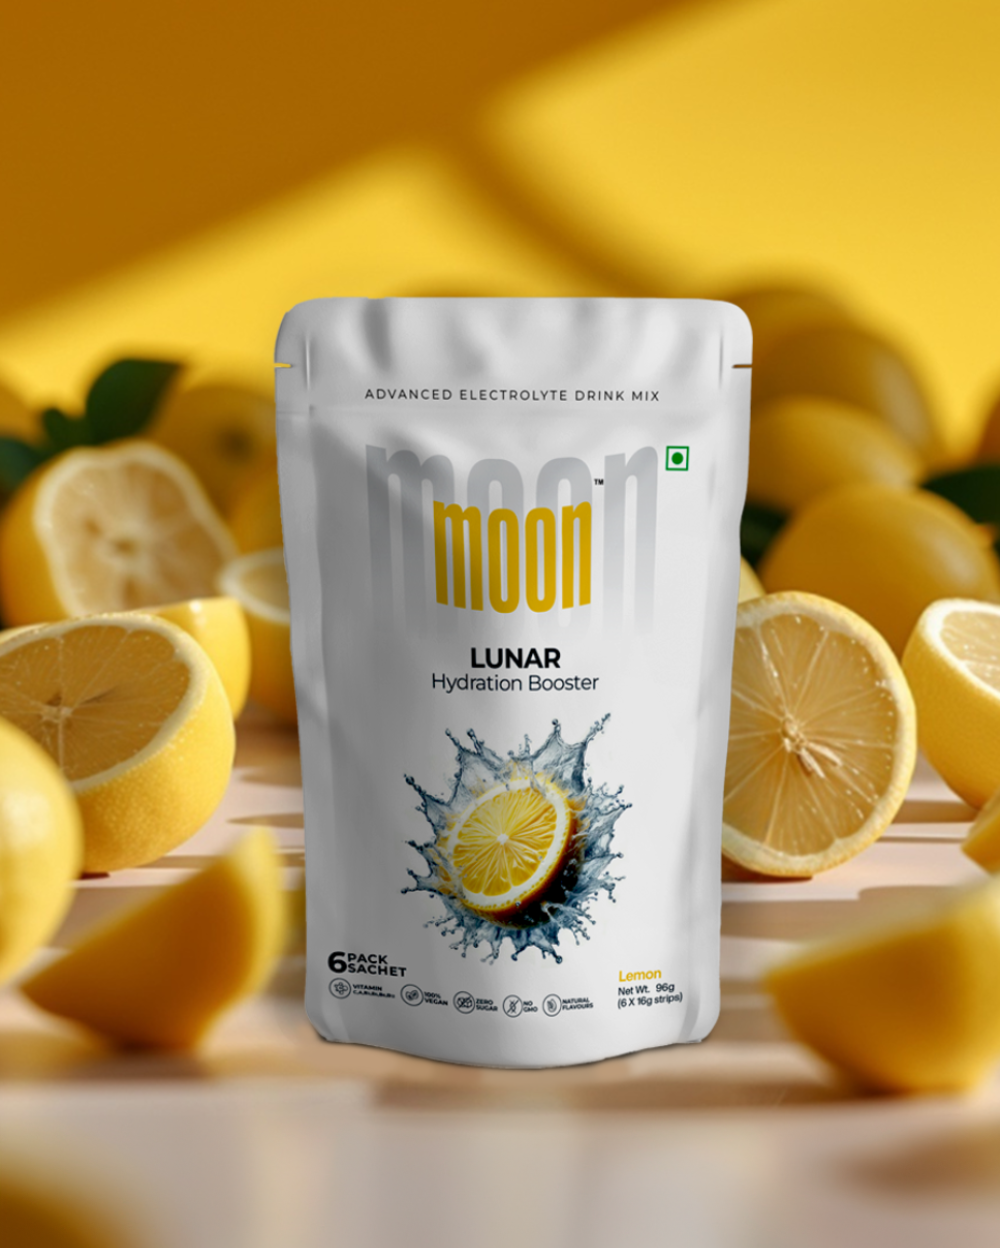 A bag of organic Moon Lemon Lunar Hydration Booster by MOONFREEZE FOODS PRIVATE LIMITED on a table.